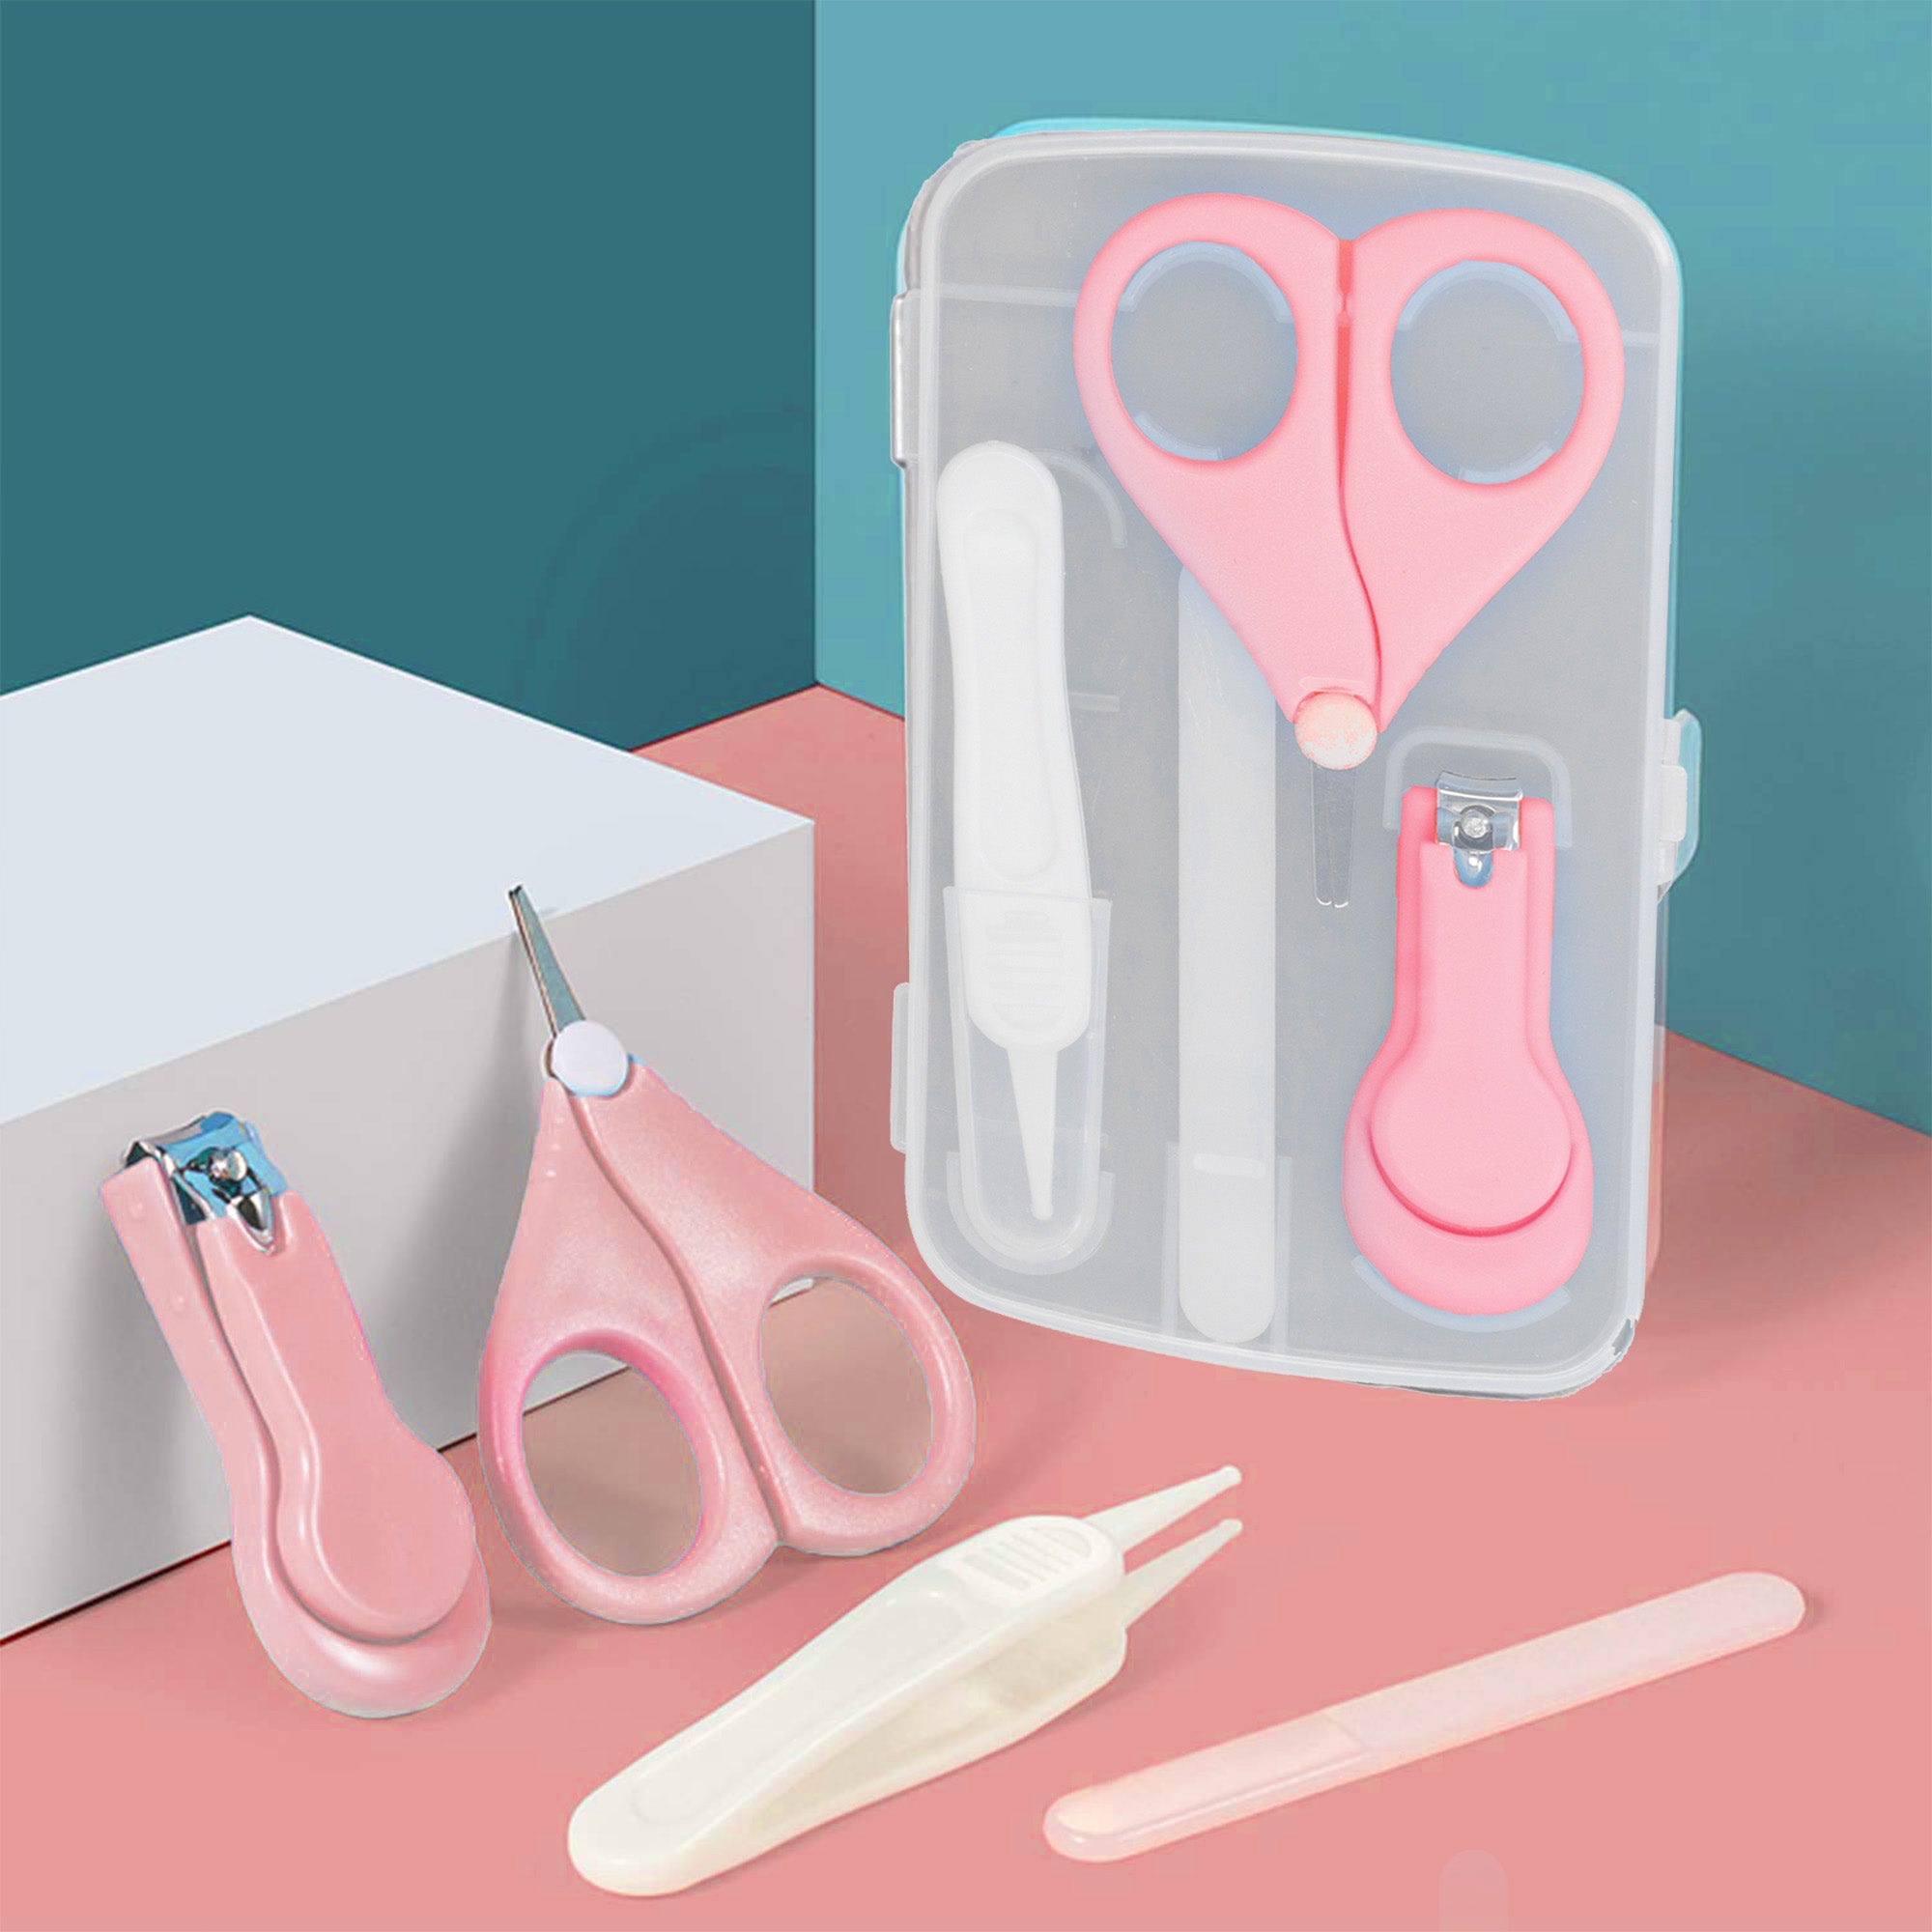 Baby Moo  4 in 1 Grooming Manicure Pedicure Nail Clipper Set - Pink - Baby Moo